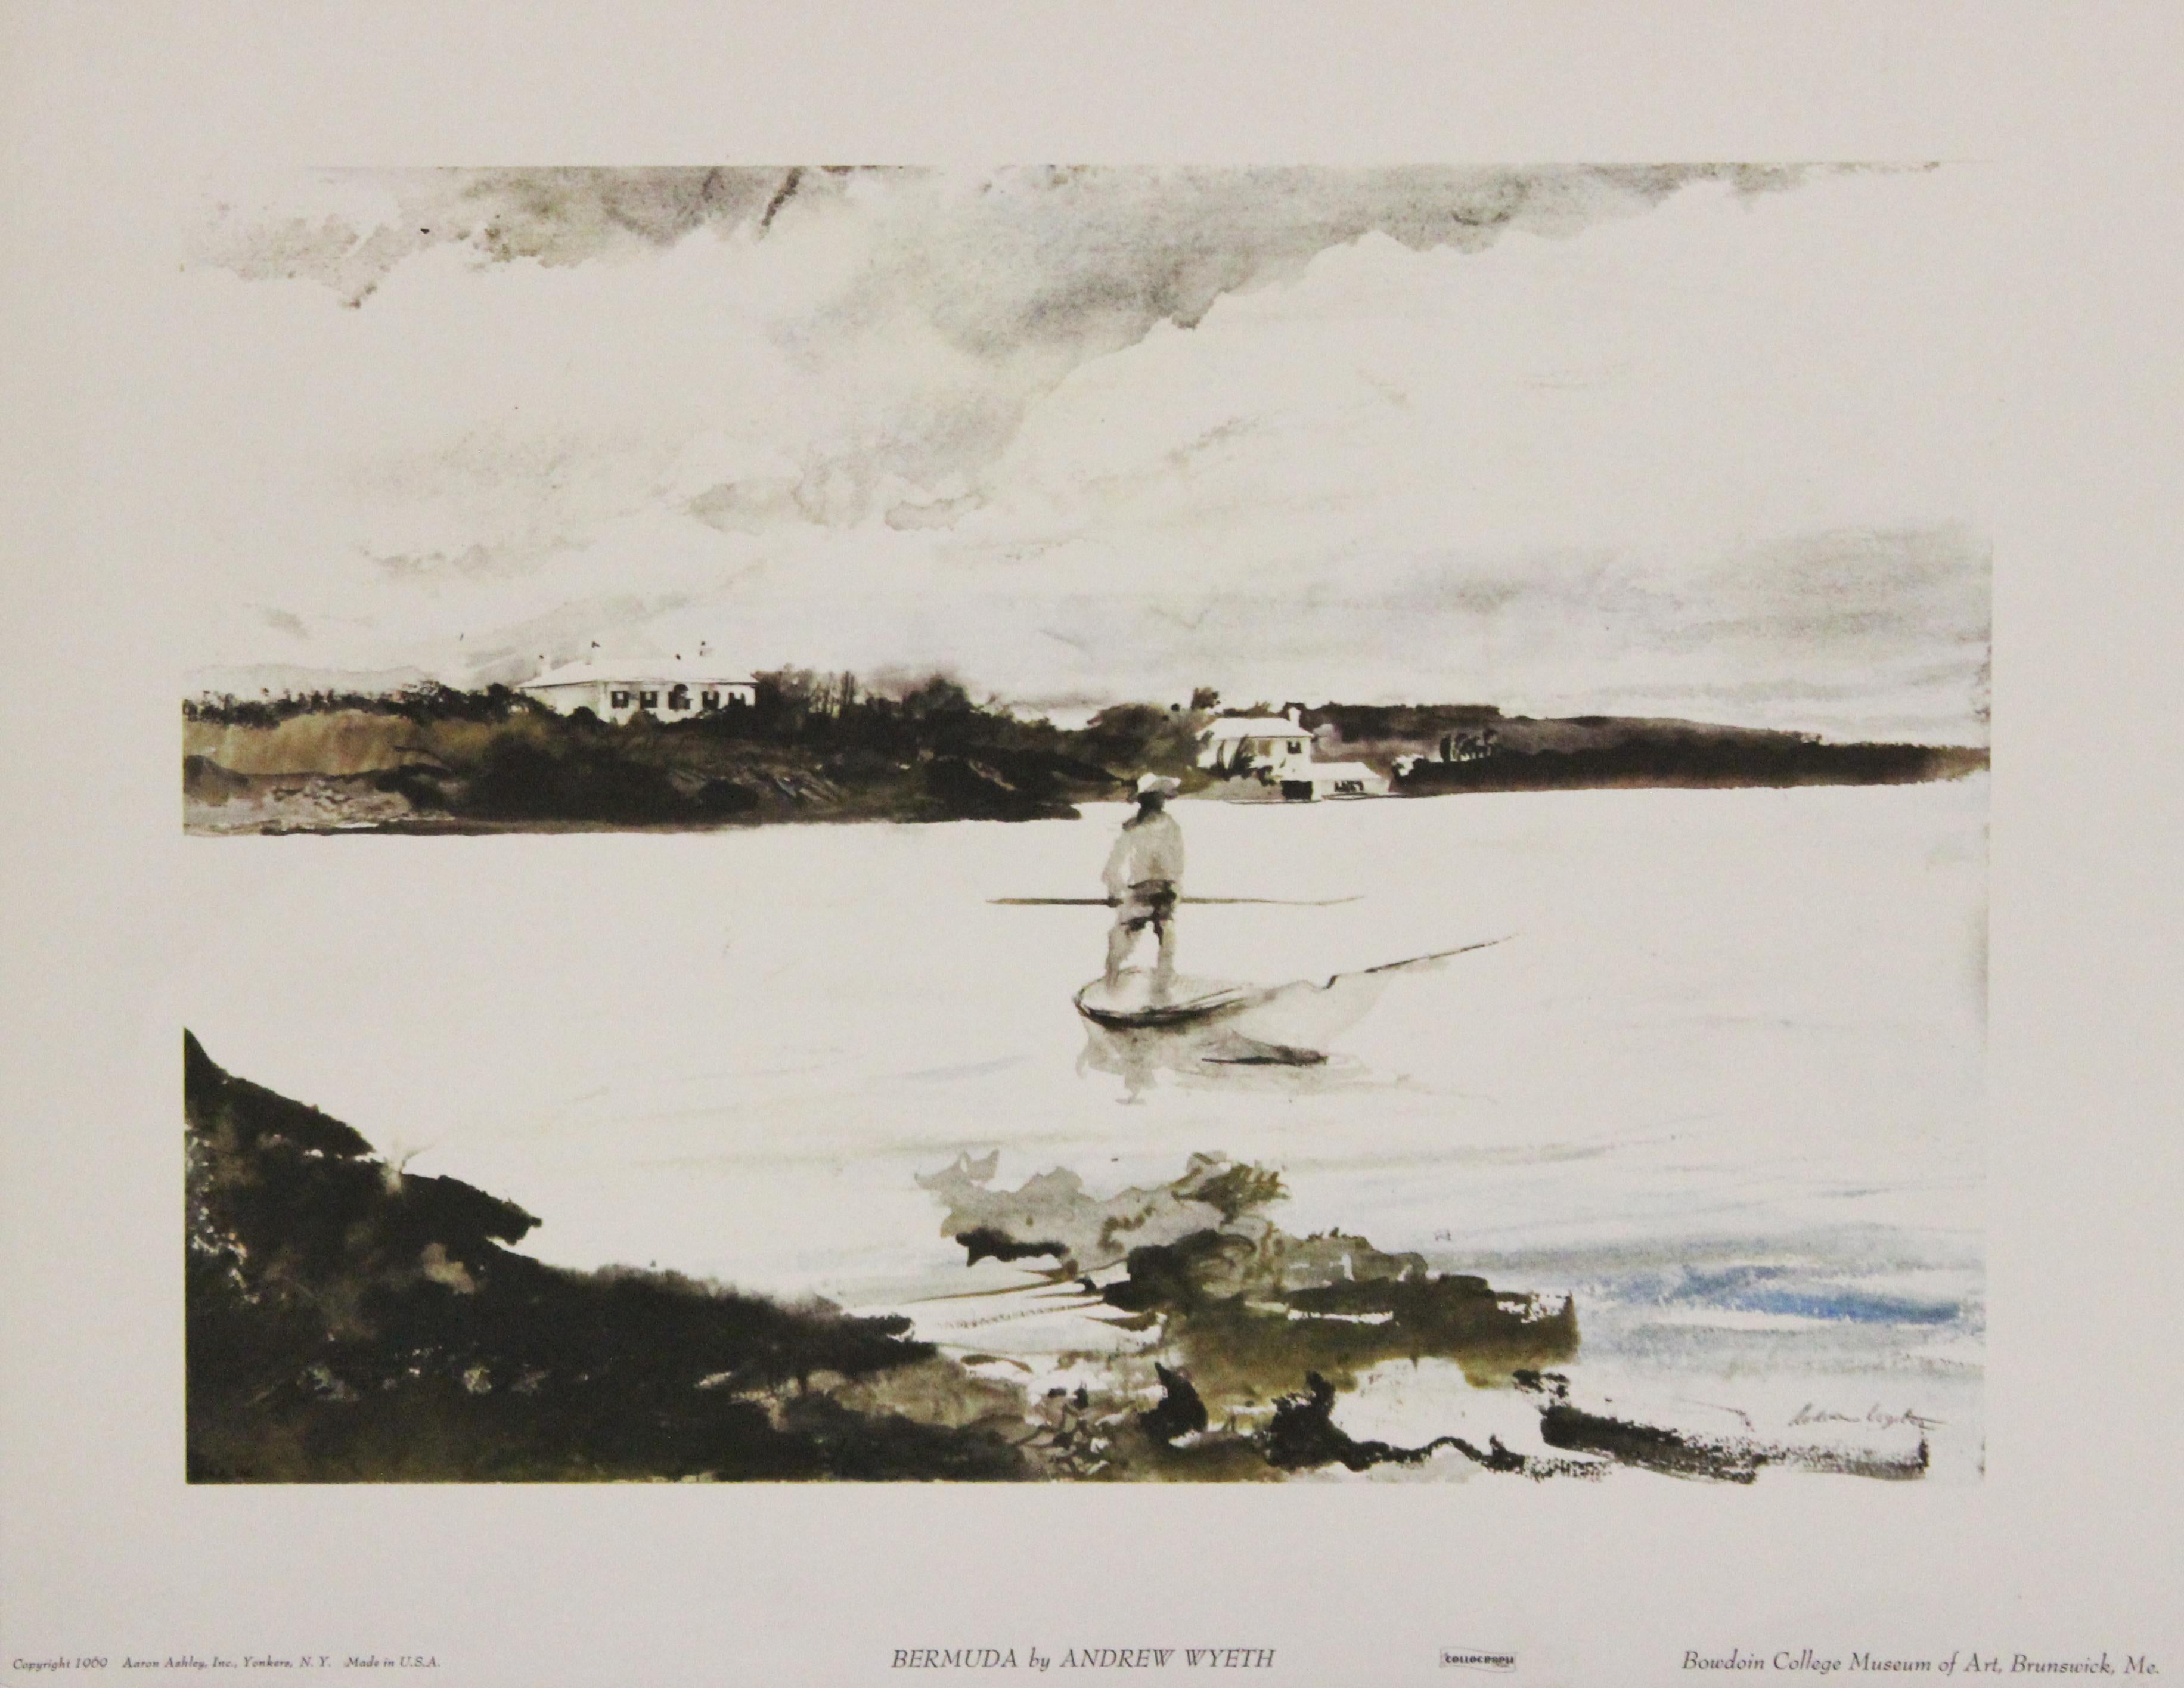 (after) Andrew Wyeth Landscape Print - Bermuda-Poster. Copyright Aaron Ashley, Inc. 